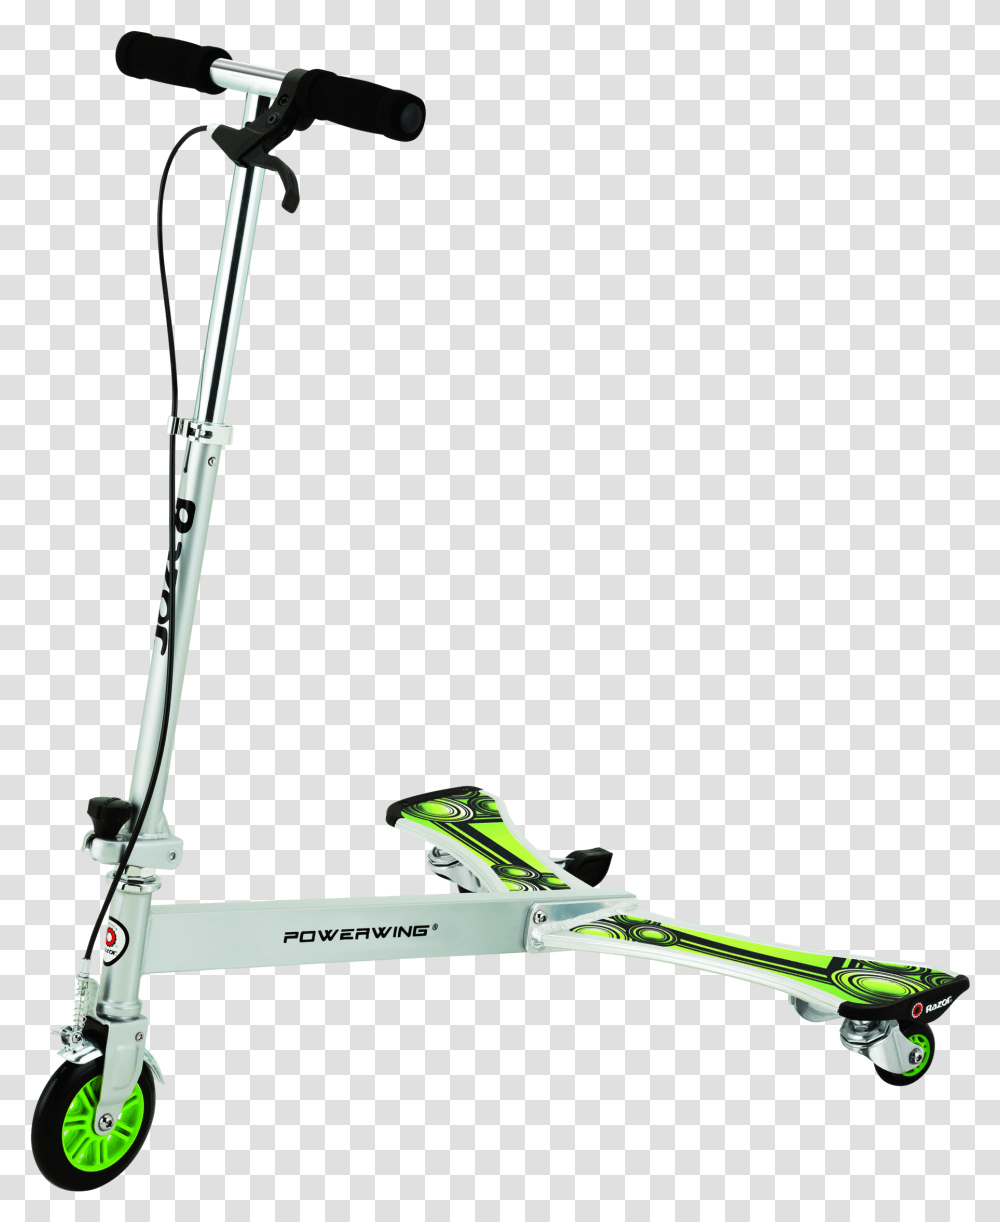 Razor Powerwing Dlx Razor Powerwing, Scooter, Vehicle, Transportation, Bow Transparent Png